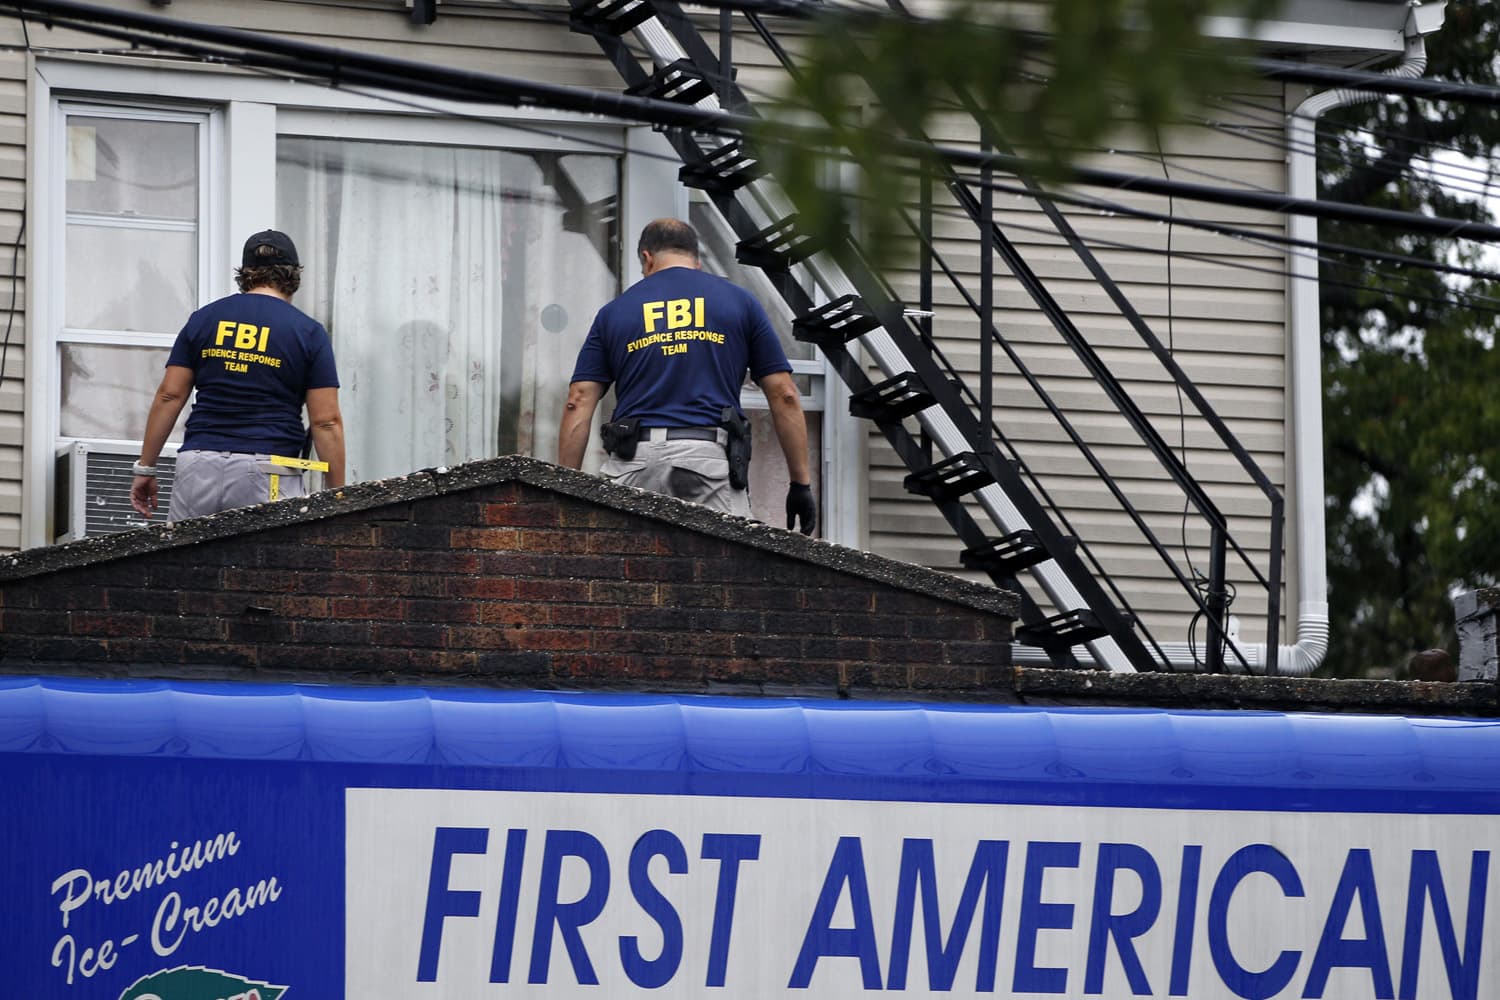 FBI agents walk around the roof outside an apartment during an investigation at a building in Elizabeth, N.J. FBI agents are searching the apartment in New Jersey that is tied to Ahmad Khan Rahami wanted for questioning in the New York City bombing. (Mel Evans/AP)